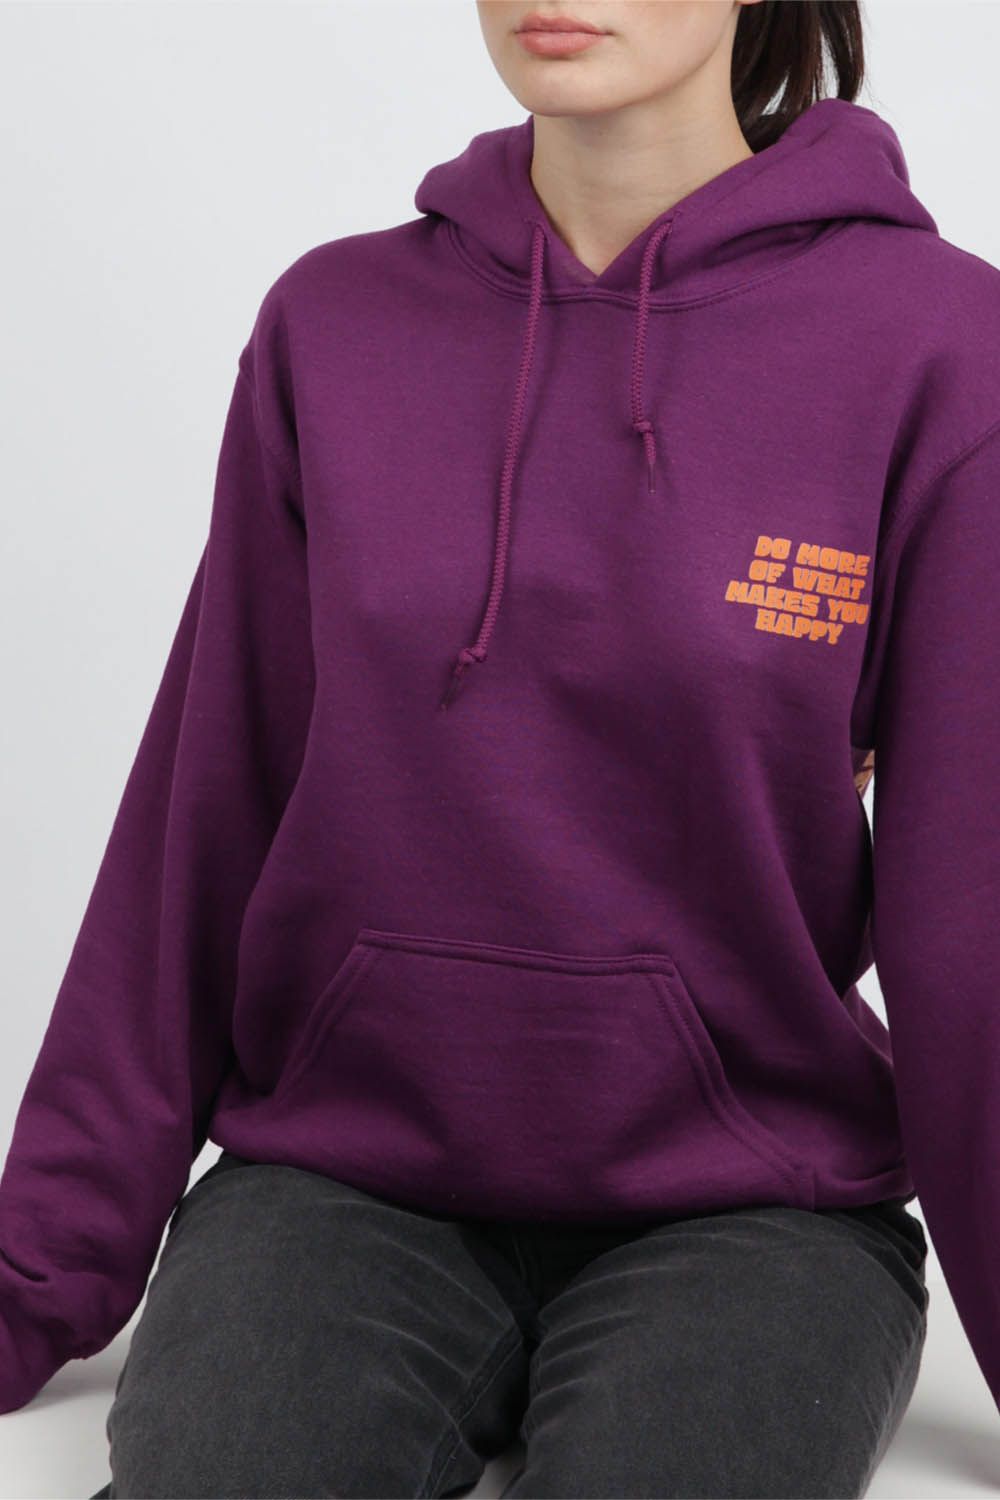 DO MORE OF WHAT MAKES YOU HAPPY HOODIE IN PLUM (PACK OF 3)